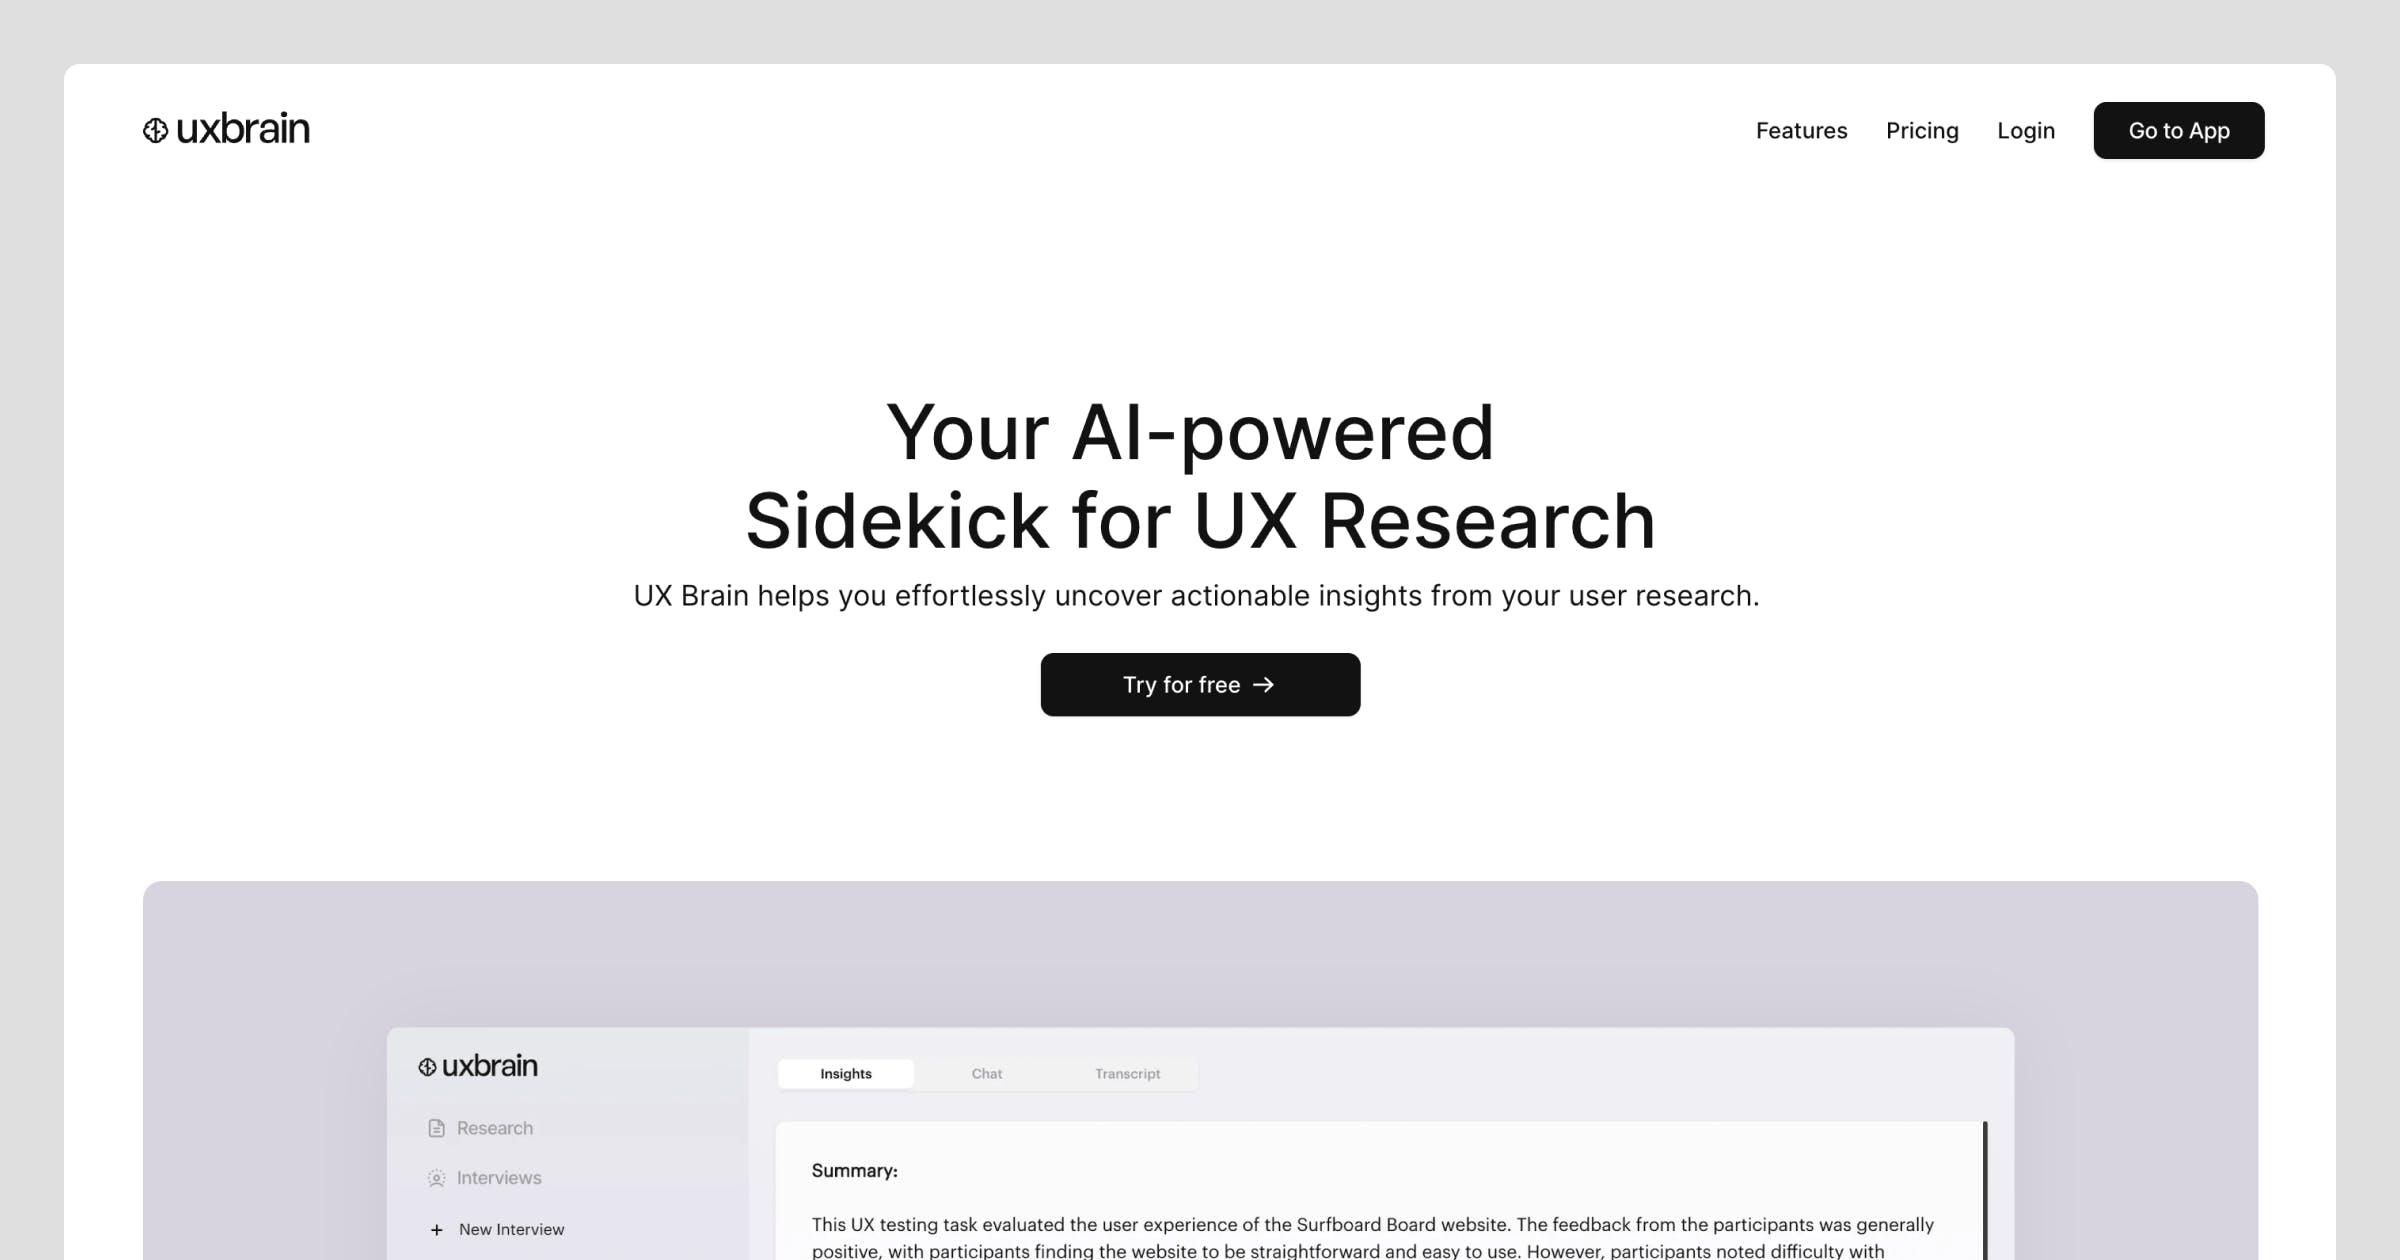 UX Brain - A tool to uncover actionable insights from user research